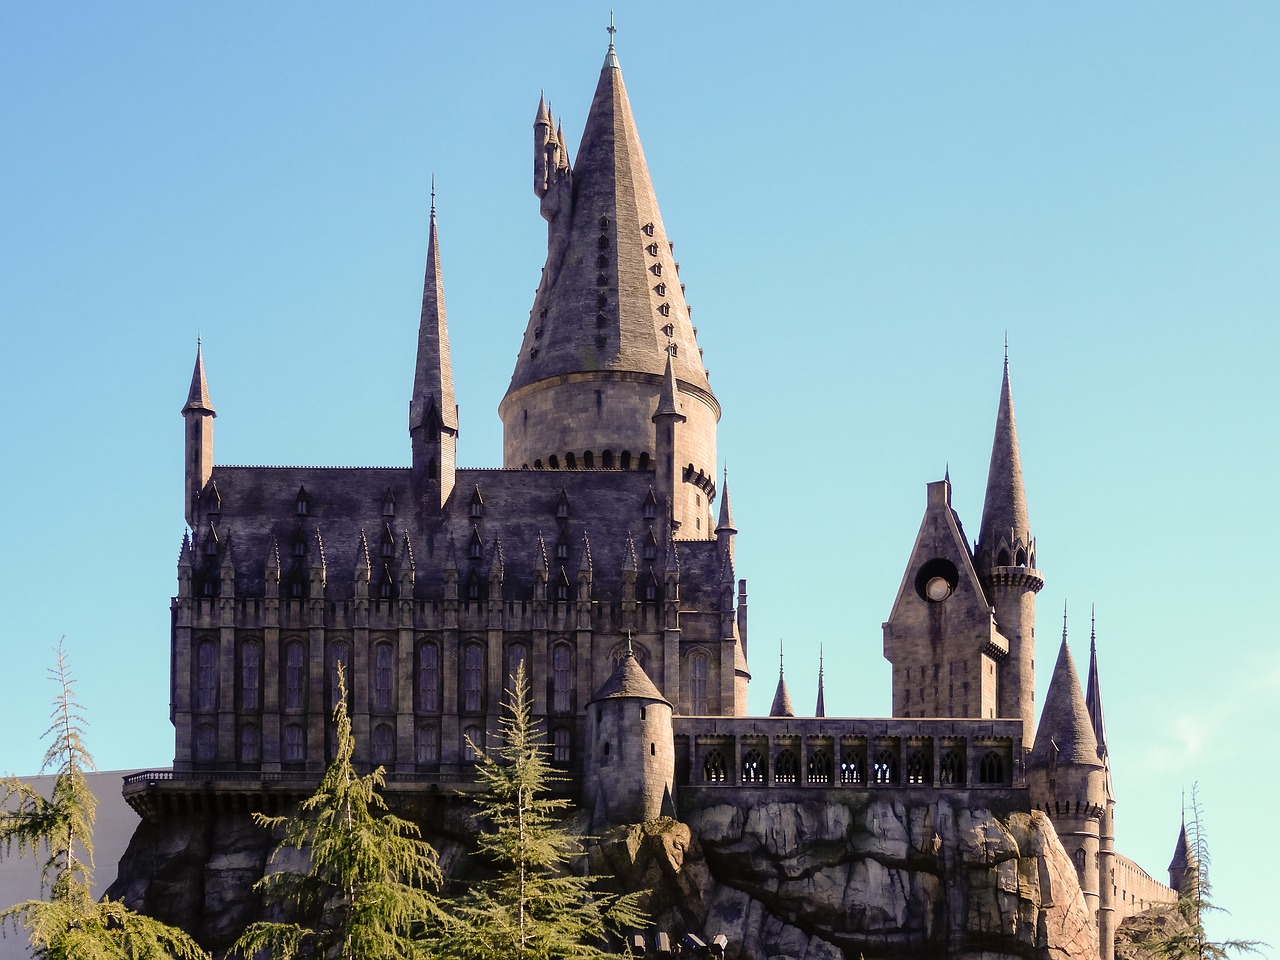 hogwarts,harry potter,magic,conjure,magic school,building,old,los angeles,universal studio,california,tower,old building,achitecture,sky,timber construction,towers,blue sky,castle,free pictures, free photos, free images, royalty free, free illustrations, public domain